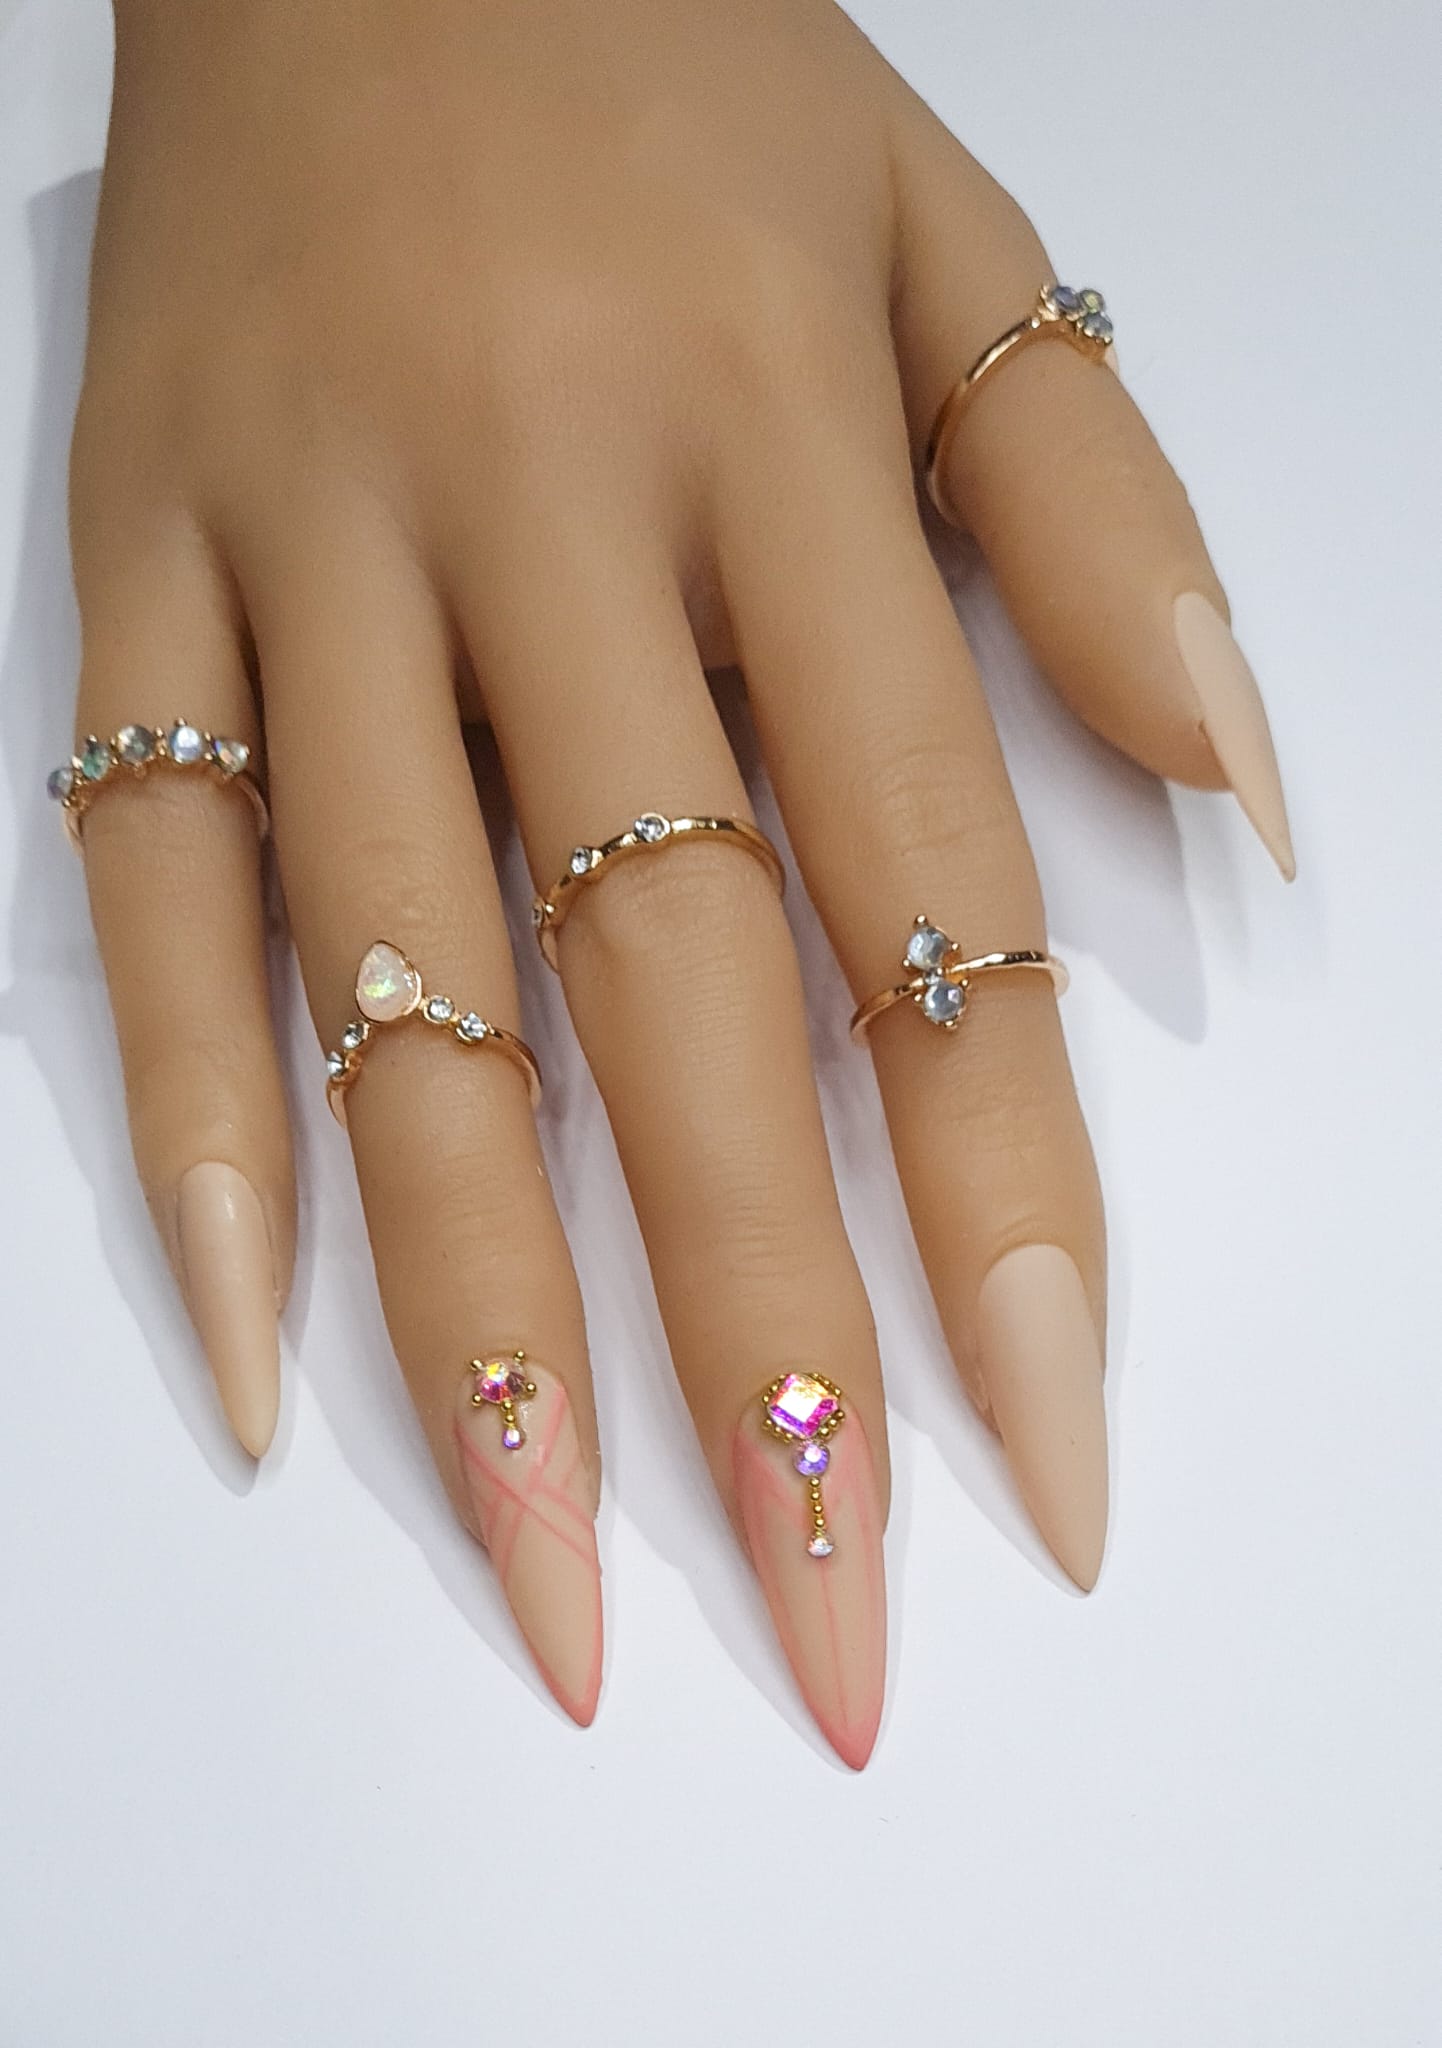 Stiletto shaped Matte Pink Press On Nails Rhinestone design accent nails spring summer collection full cover gel tip luxury false nails salon quality hand painted custom made uk